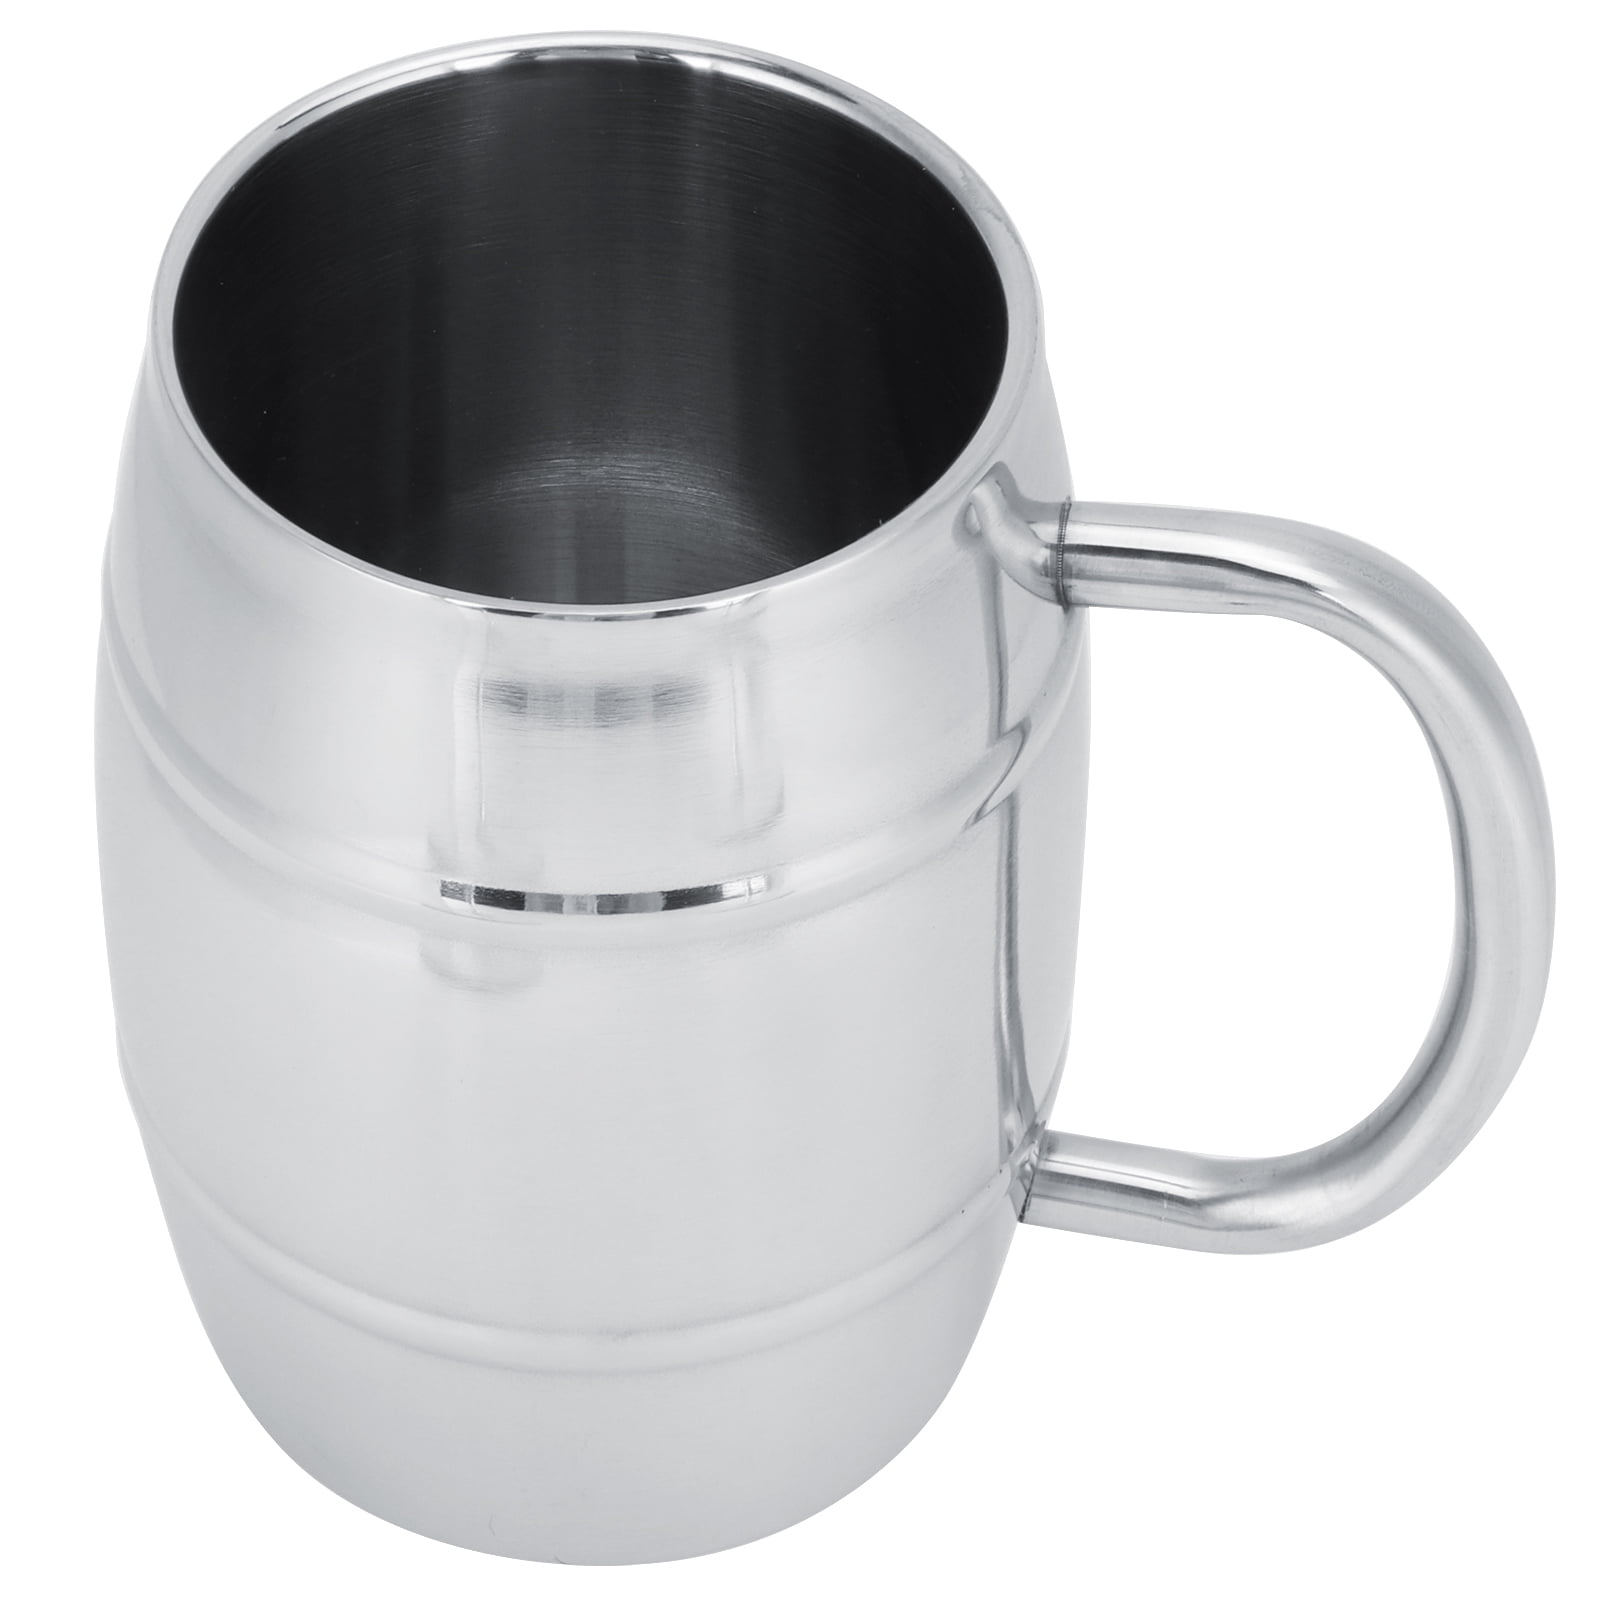 Barrel Stainless Steel Camping 2 Wall Insulated Cup Tea Large Coffee Beer Mug 